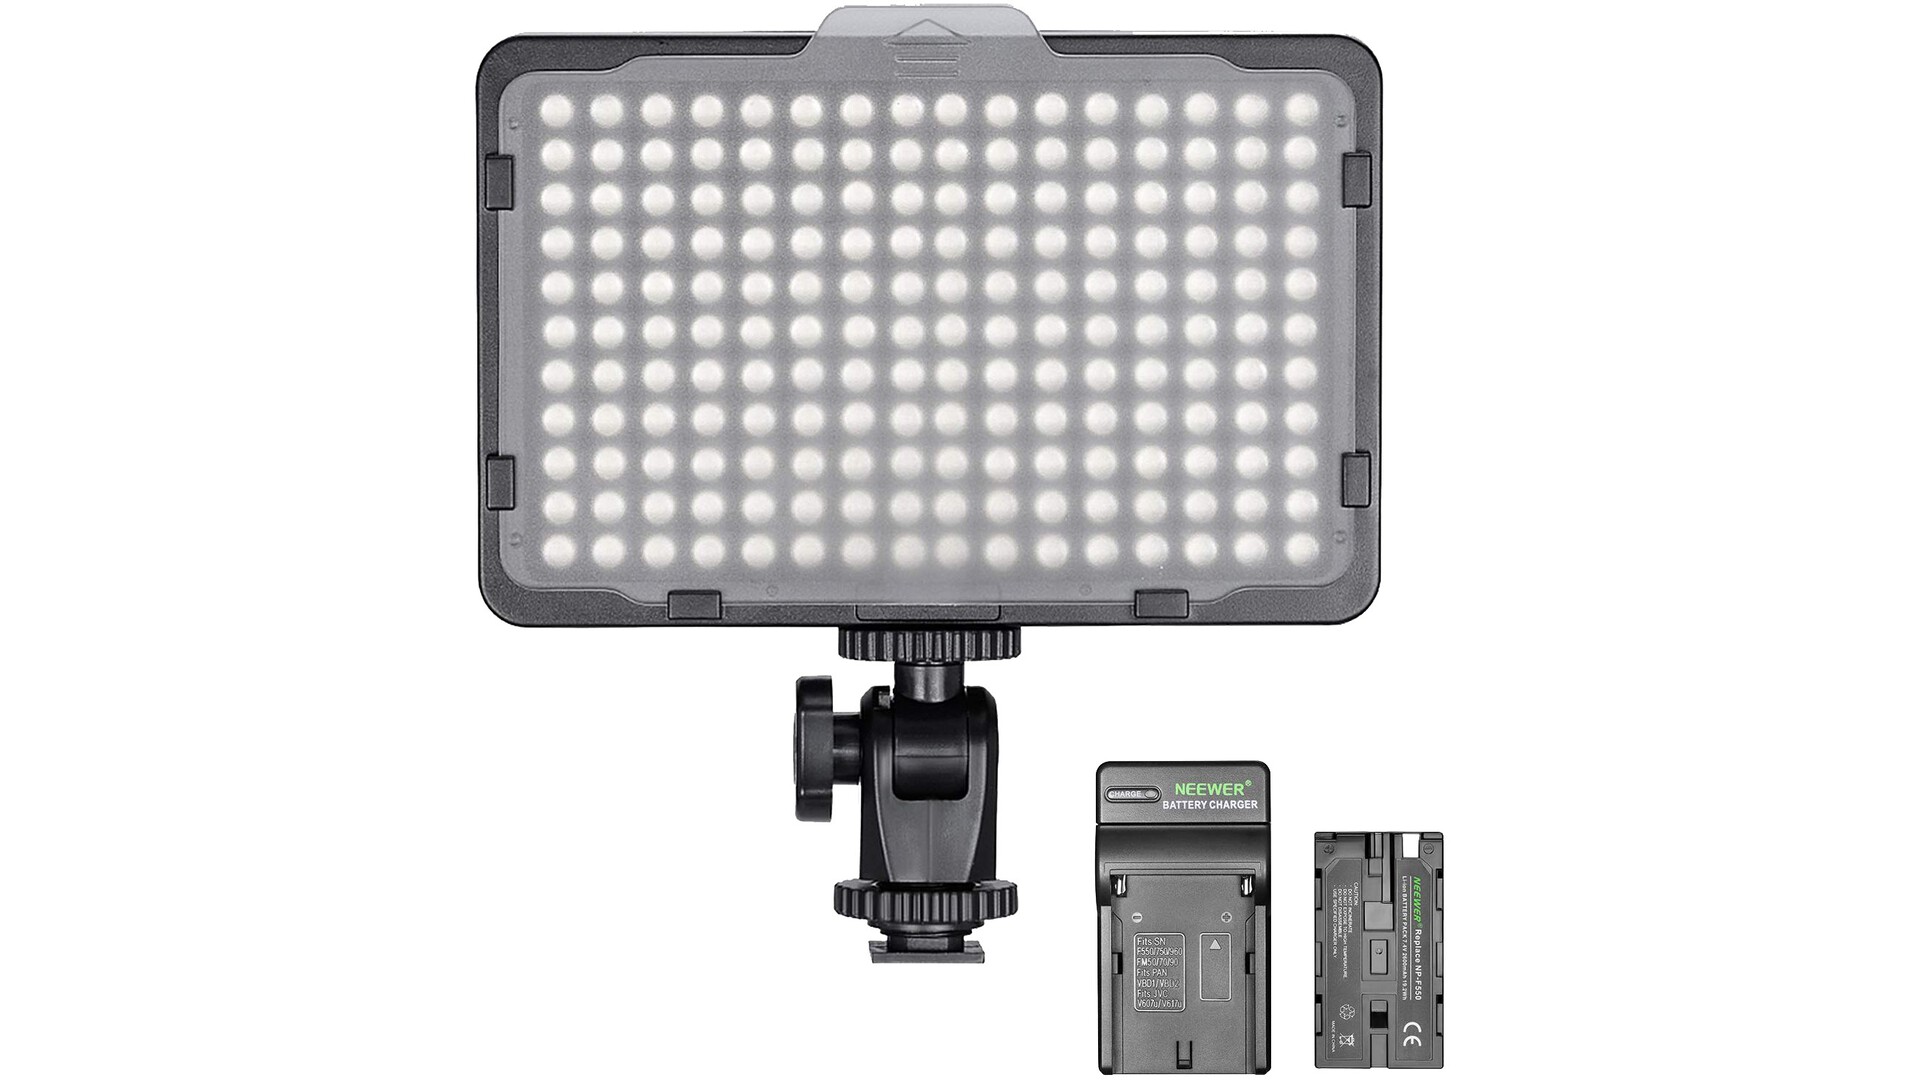 Neewer Dimmable 176 LED Panel